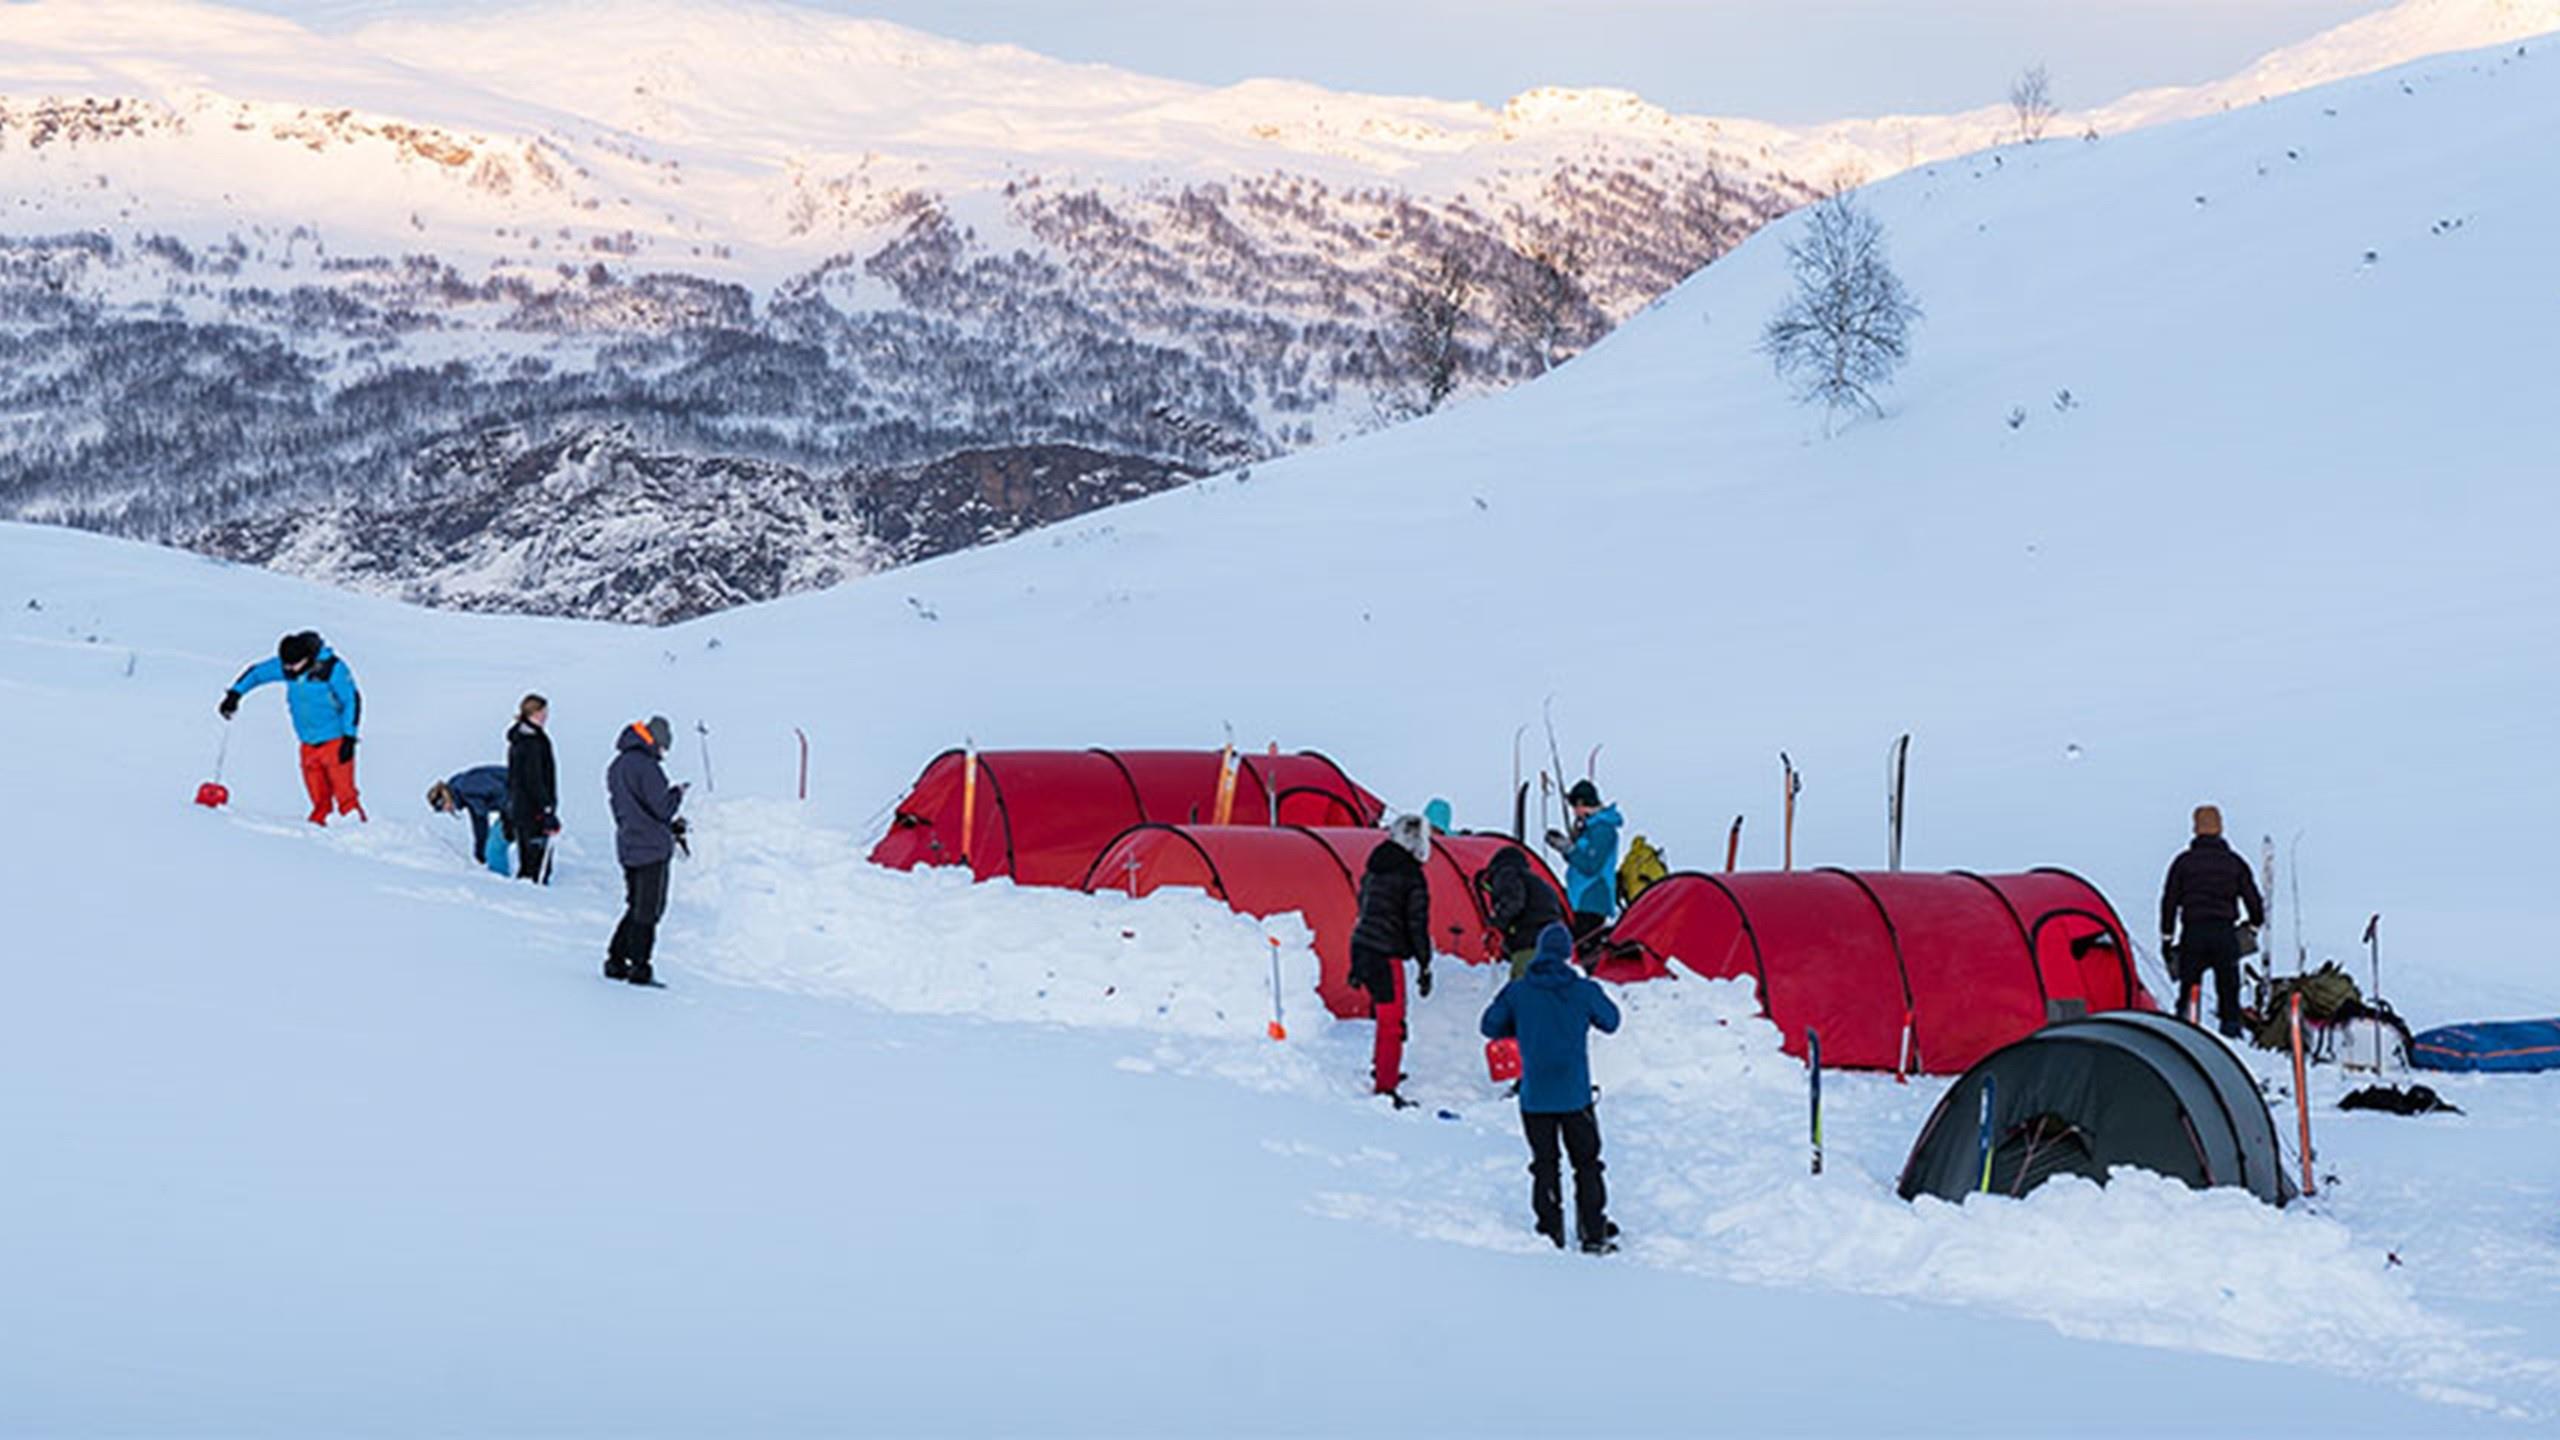 Students camping in the mountains on a snowy day